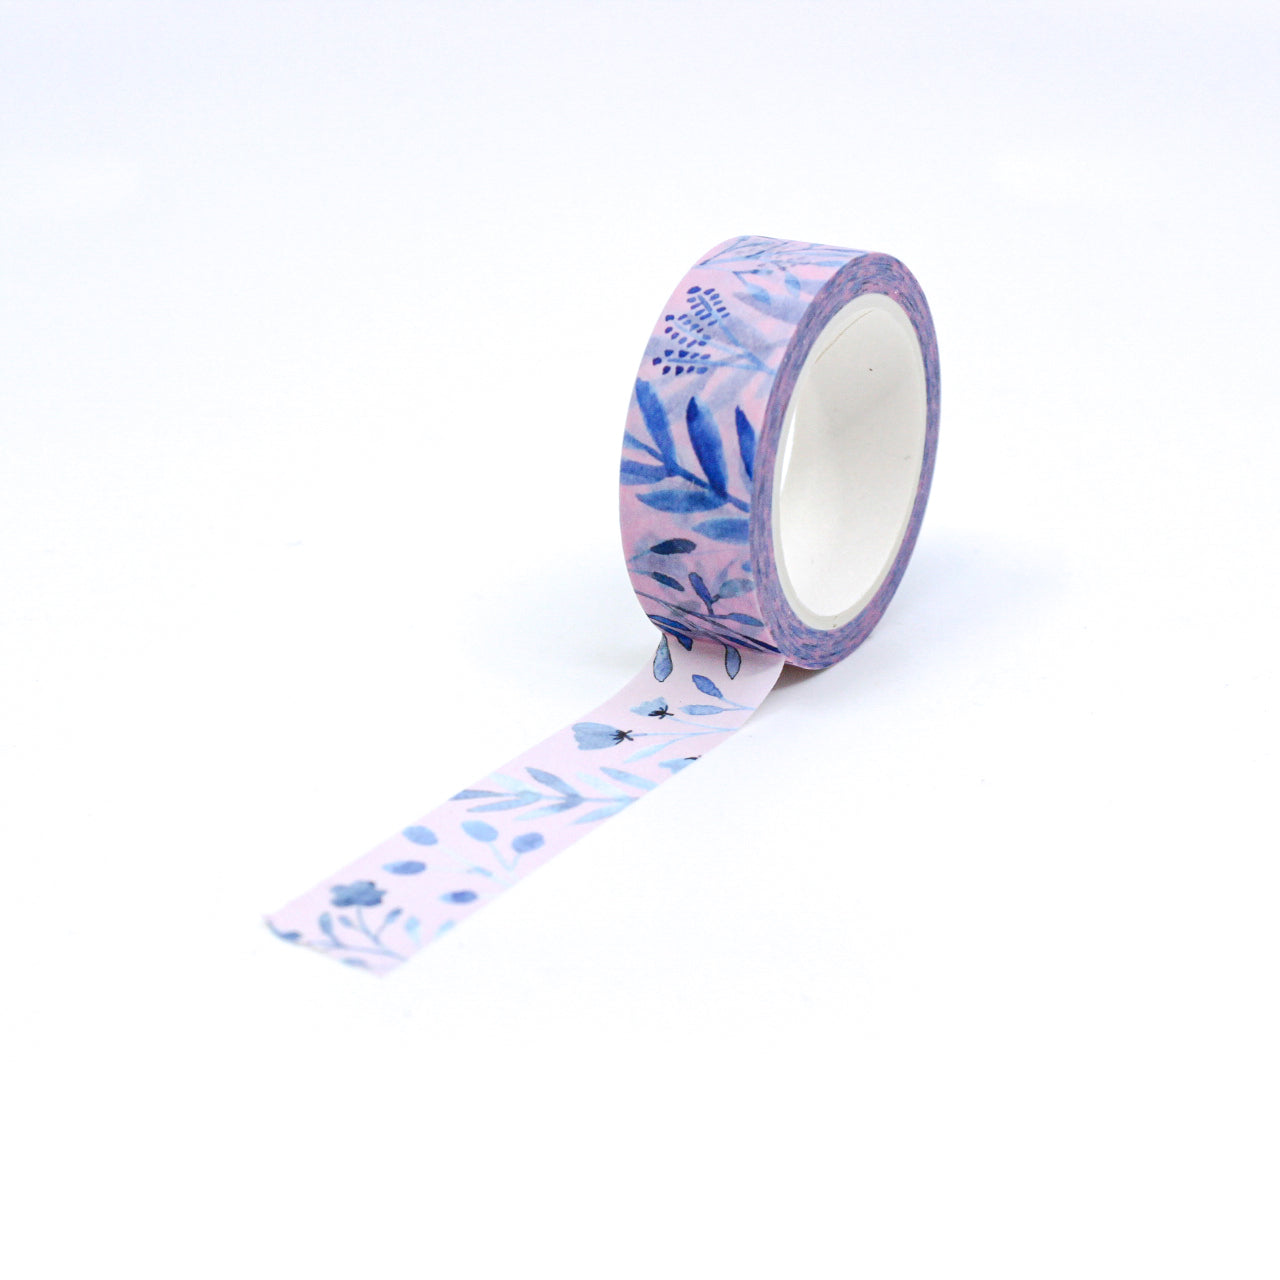 Enhance your crafts with our Lavender and Blue Floral Washi Tape, featuring a charming floral pattern in shades of lavender and blue. Ideal for adding a touch of elegance and nature to your projects. This tape is designed by Sarah Francis and sold at BBB Supplies Craft Shop.